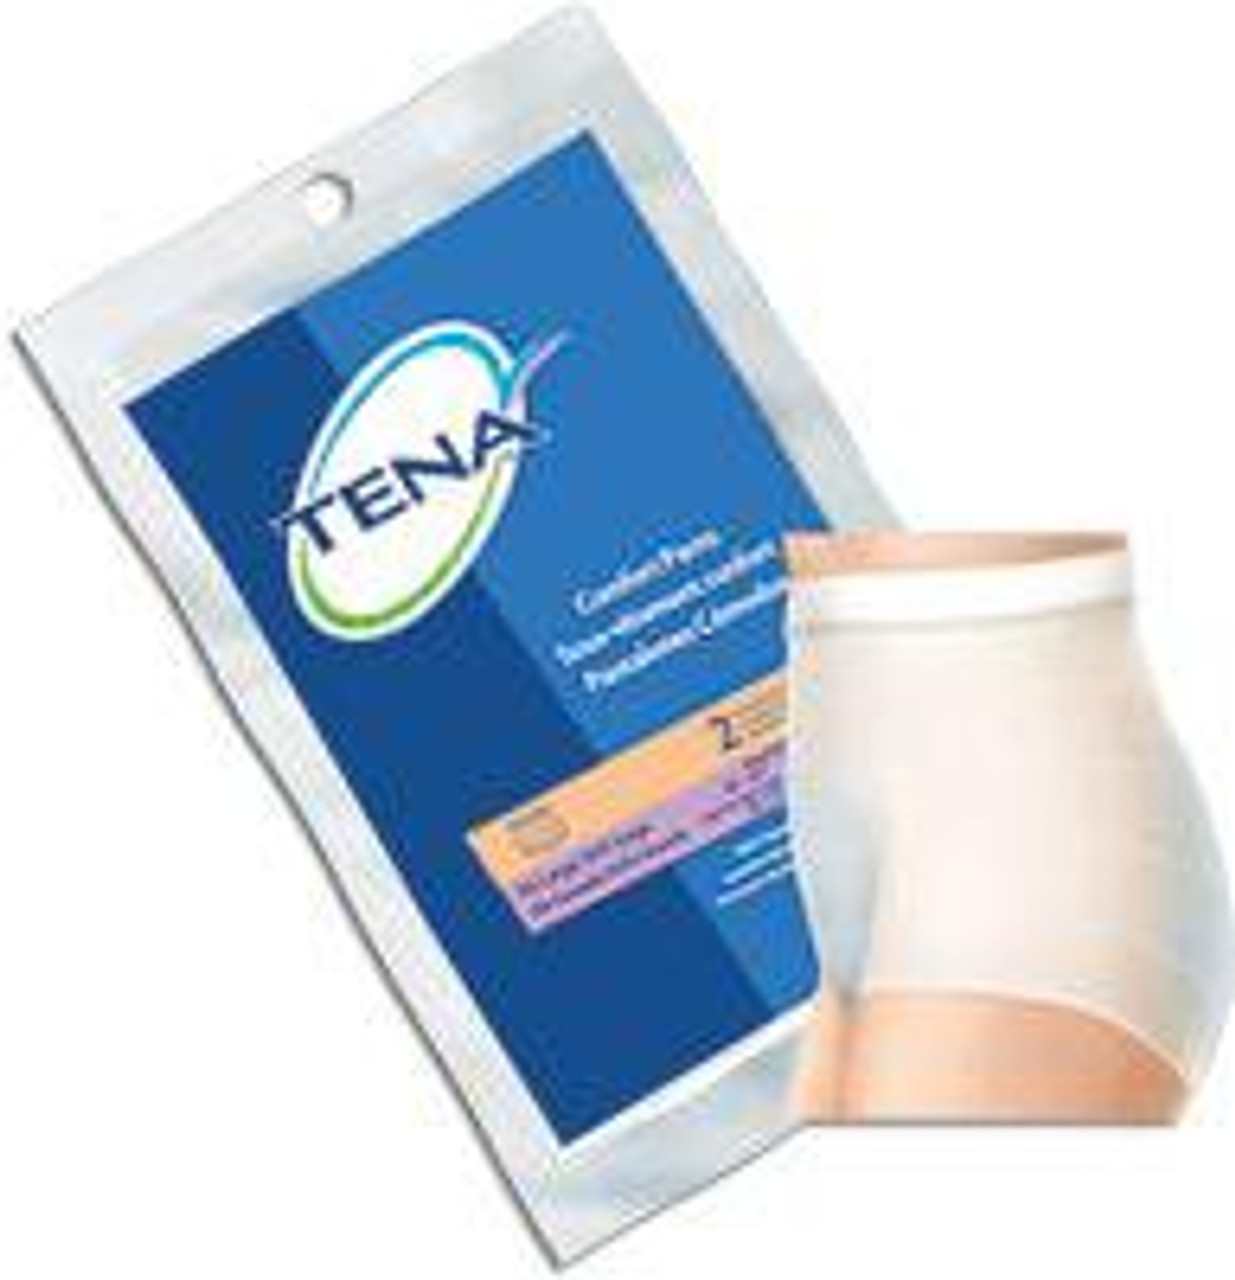 TENA 35522 Comfort Pants Large/Extra Large - Case of 24